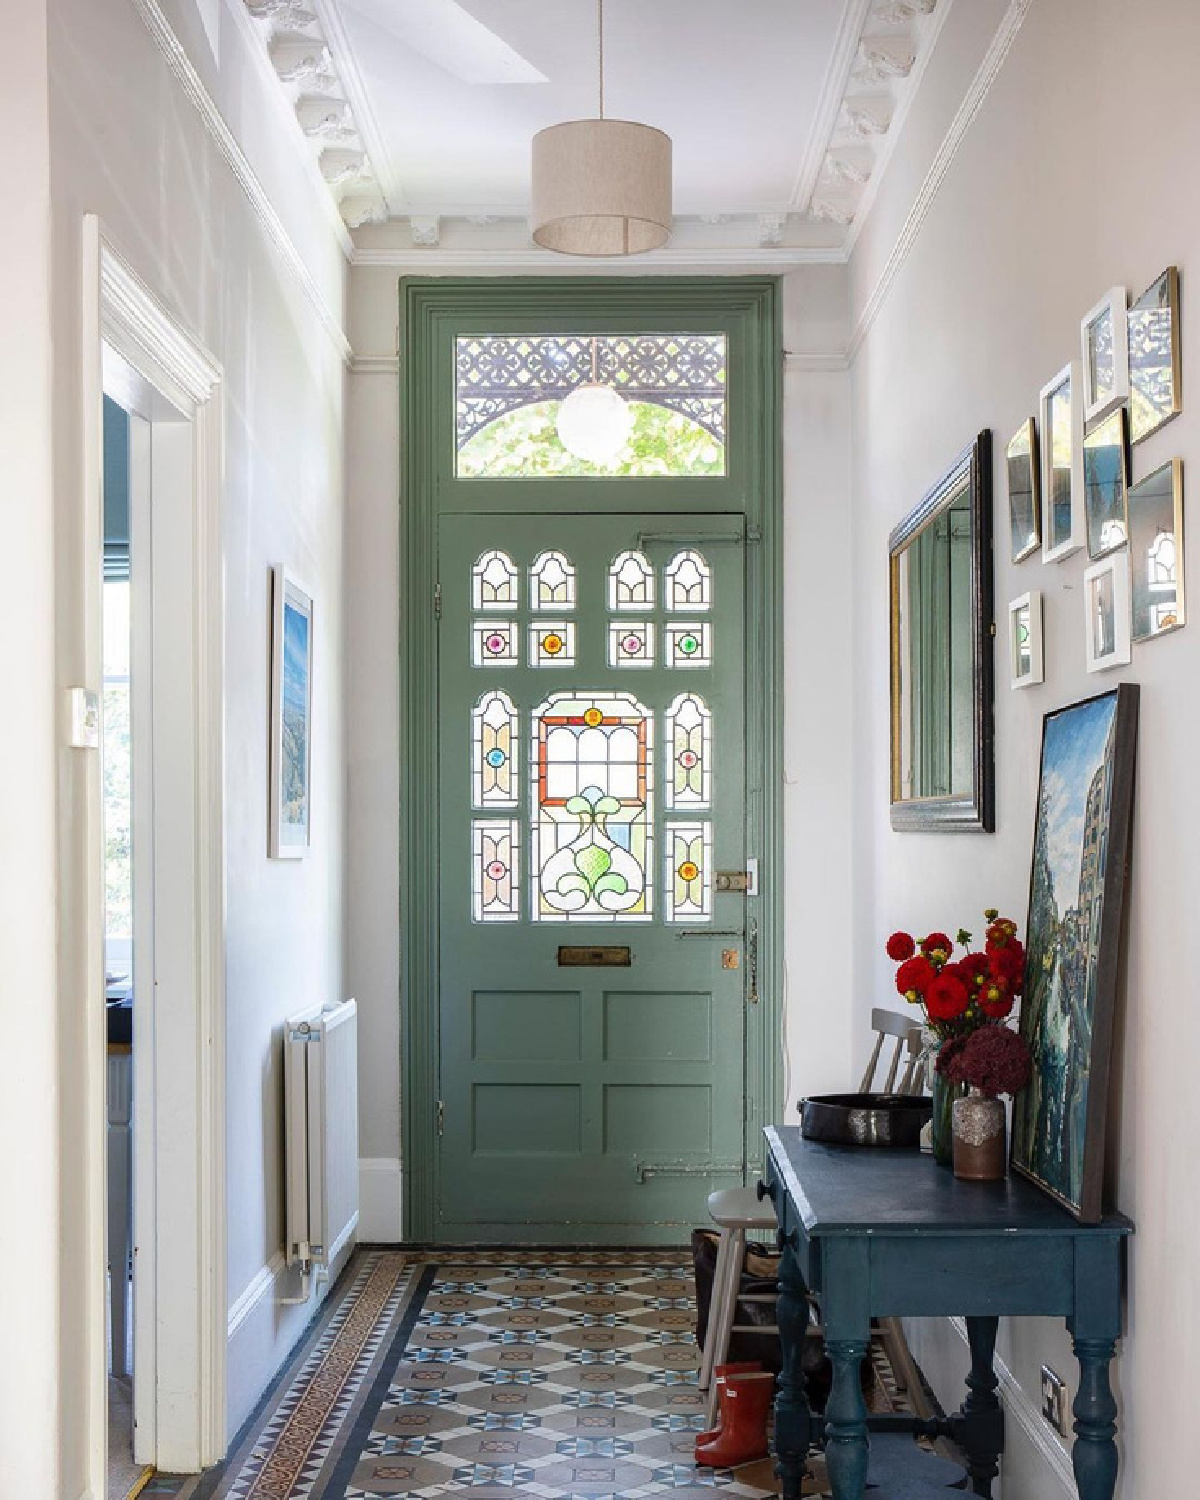 Beautiful entry in an English home with stunning sage green painted door - Imperfect Interiors. #entry #interiordesign #classicdesign #victorianhome #englishhome #sagegreen #greenpaint